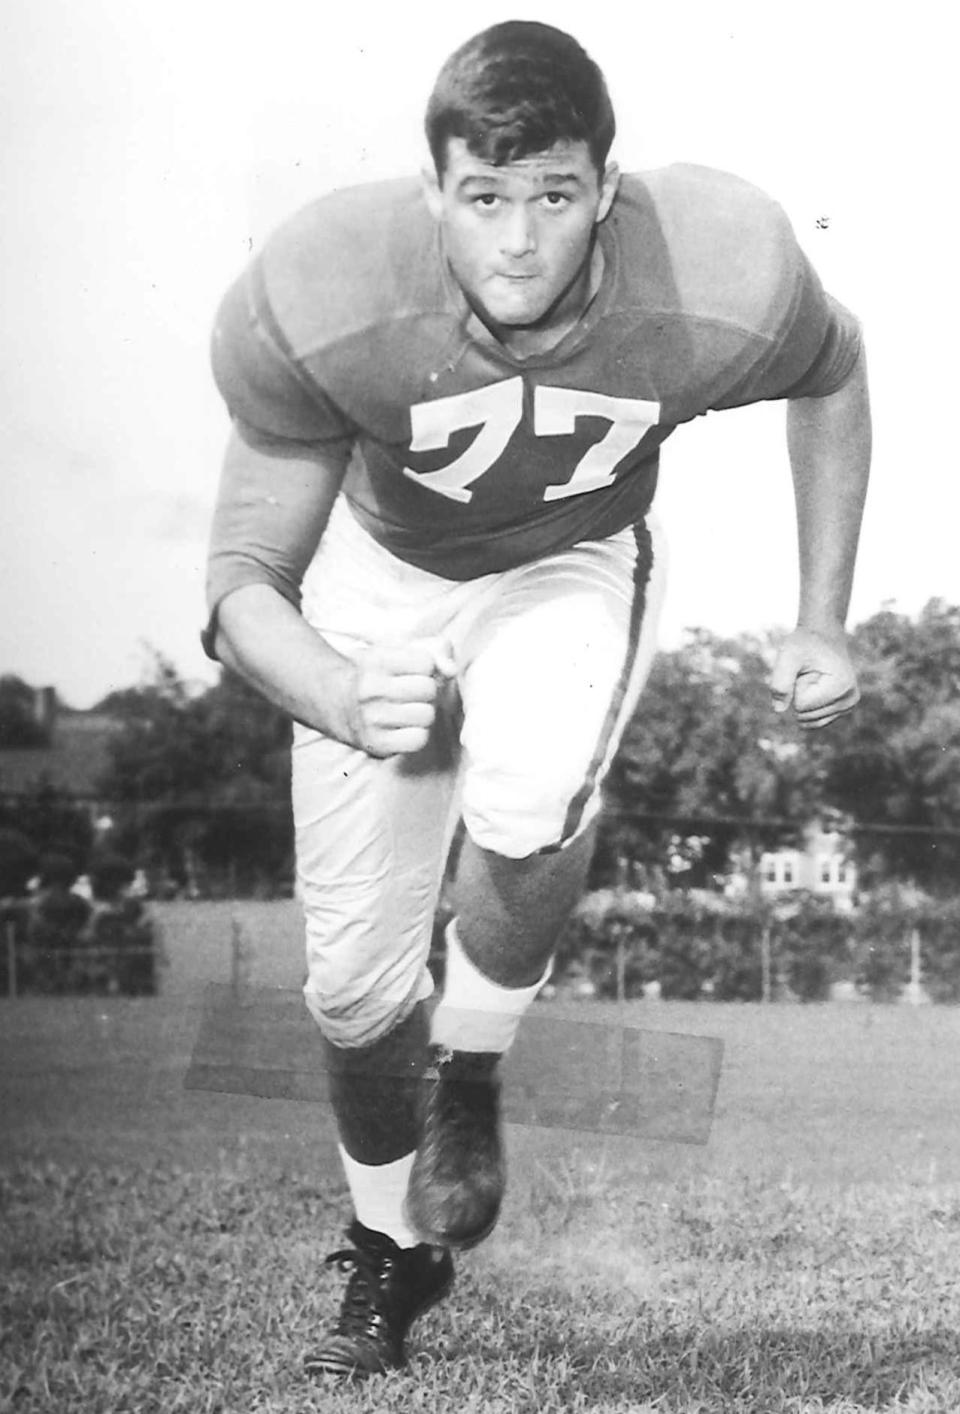 Don Leebern was a student-athlete at the University of Georgia and later served on the UGA athletic board and was a long-time appointee of the Board of Regents.